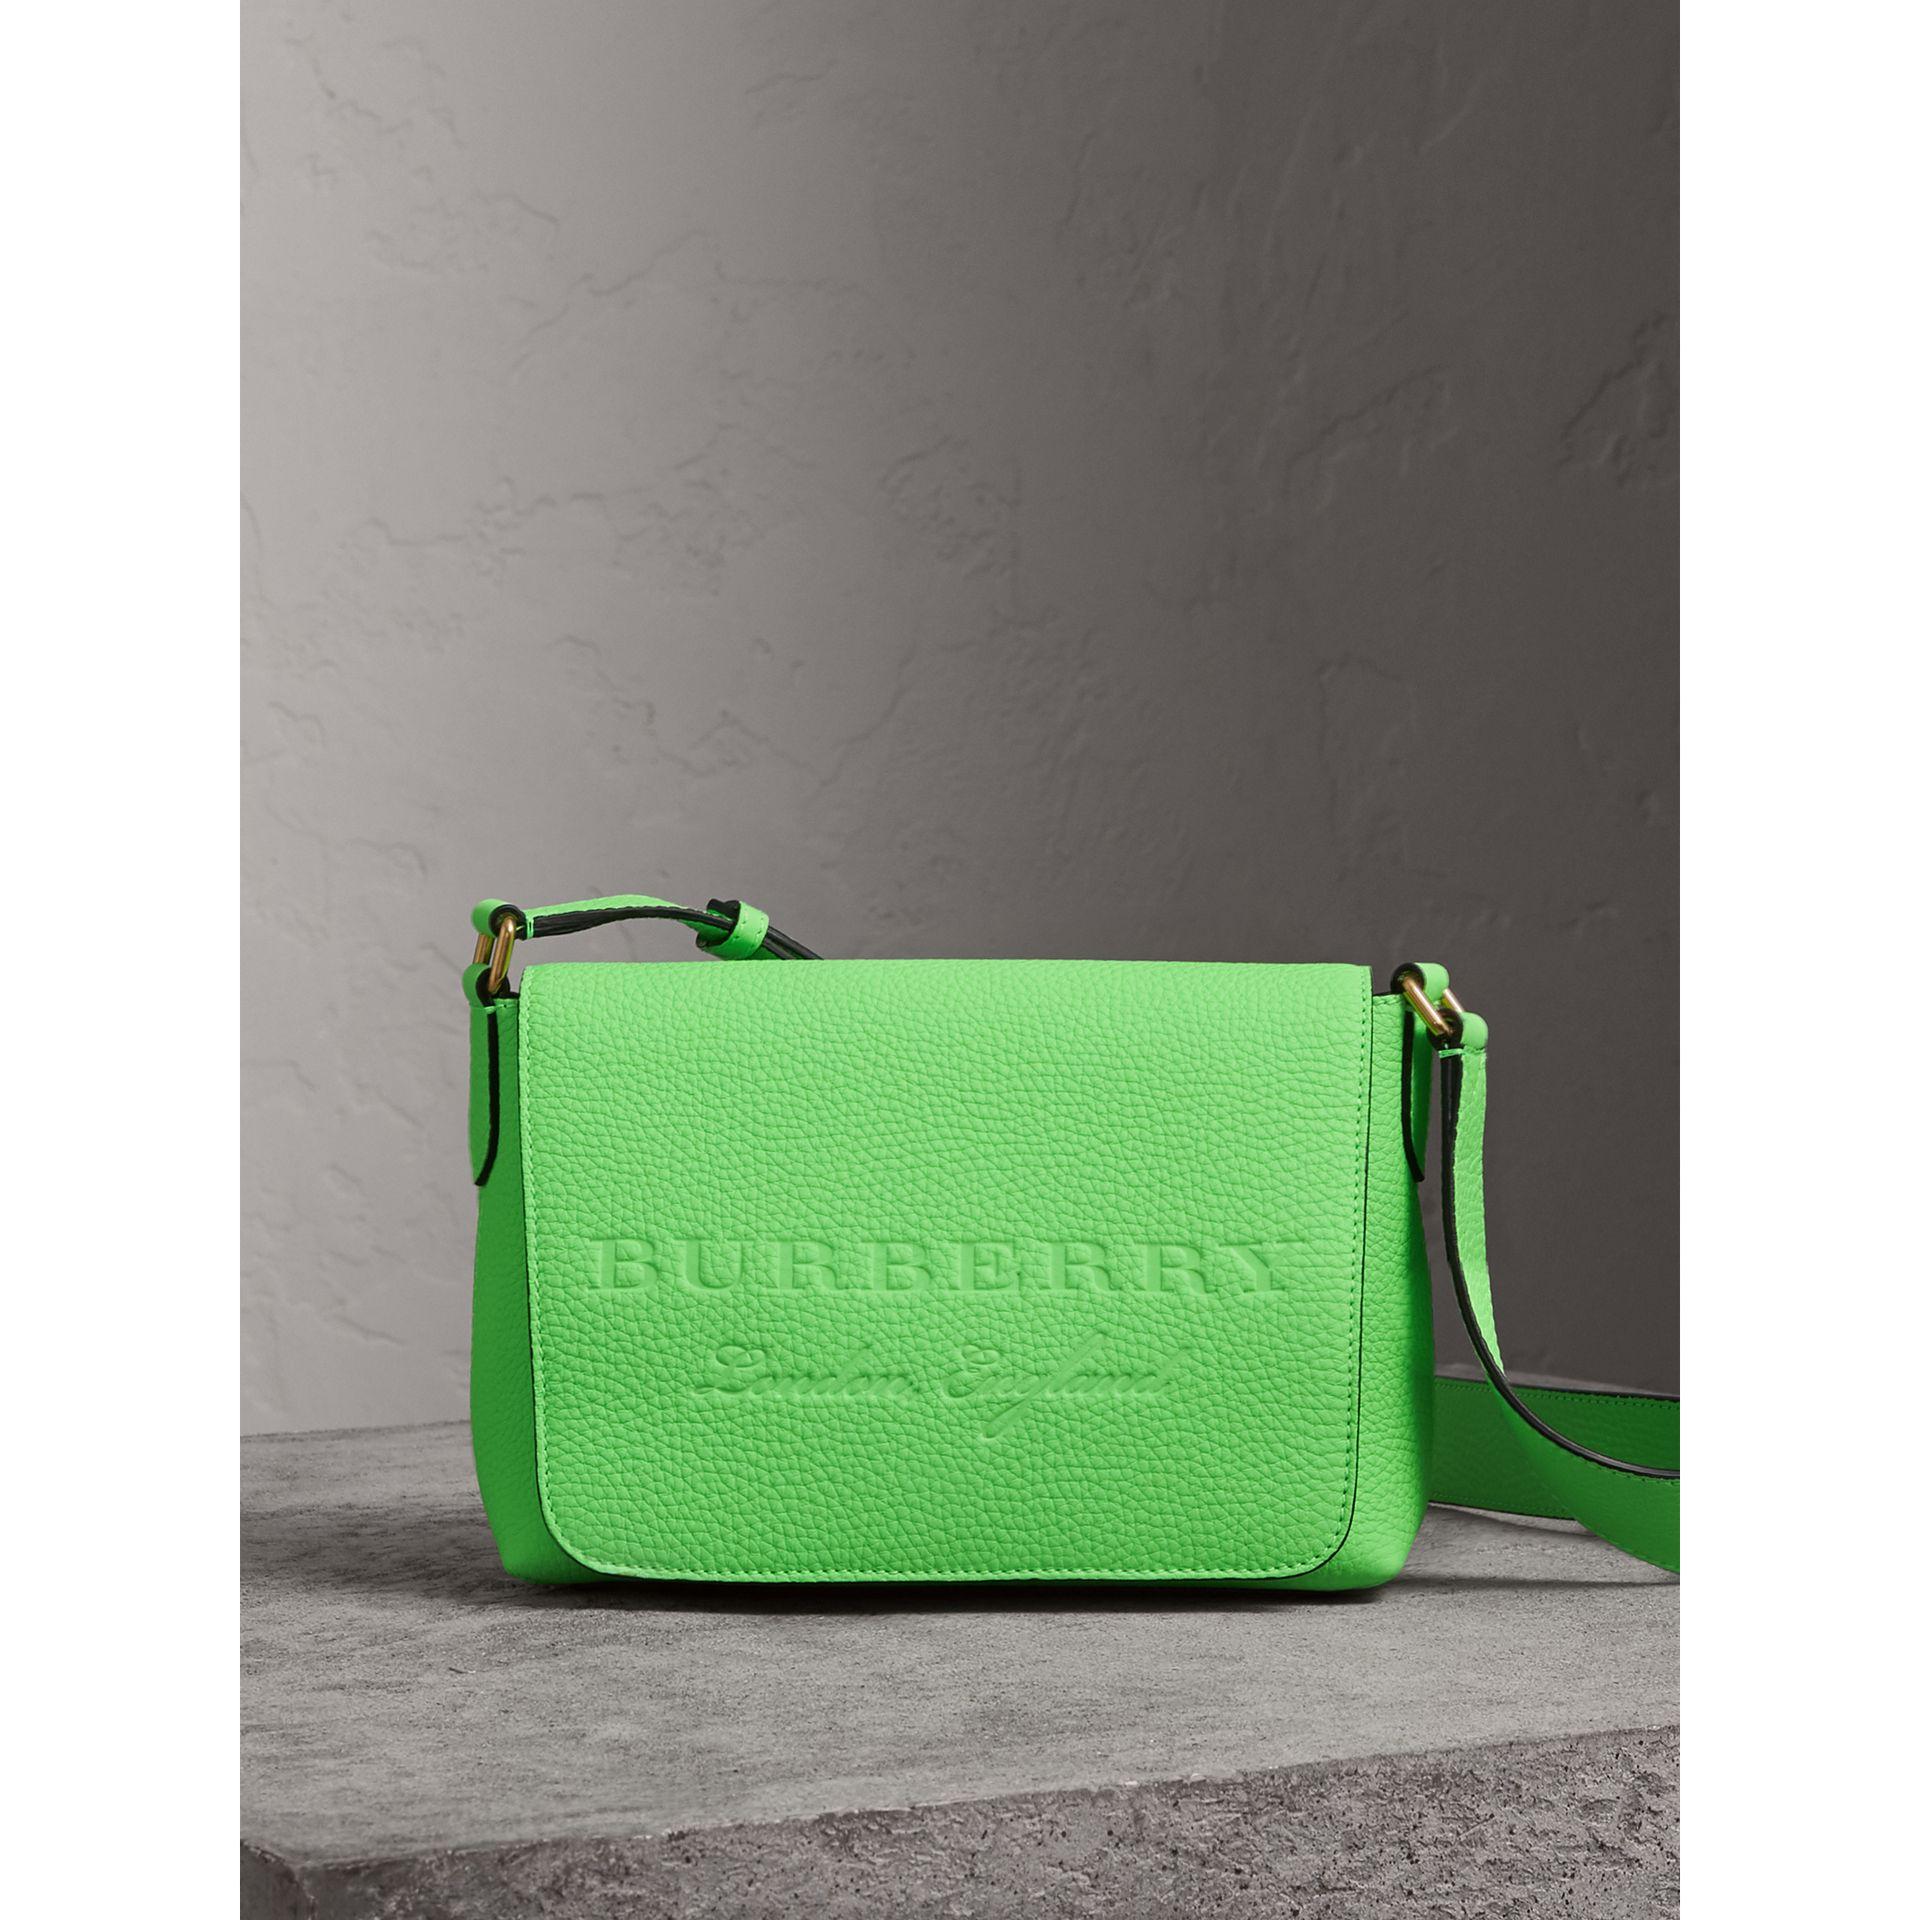 burberry neon collection